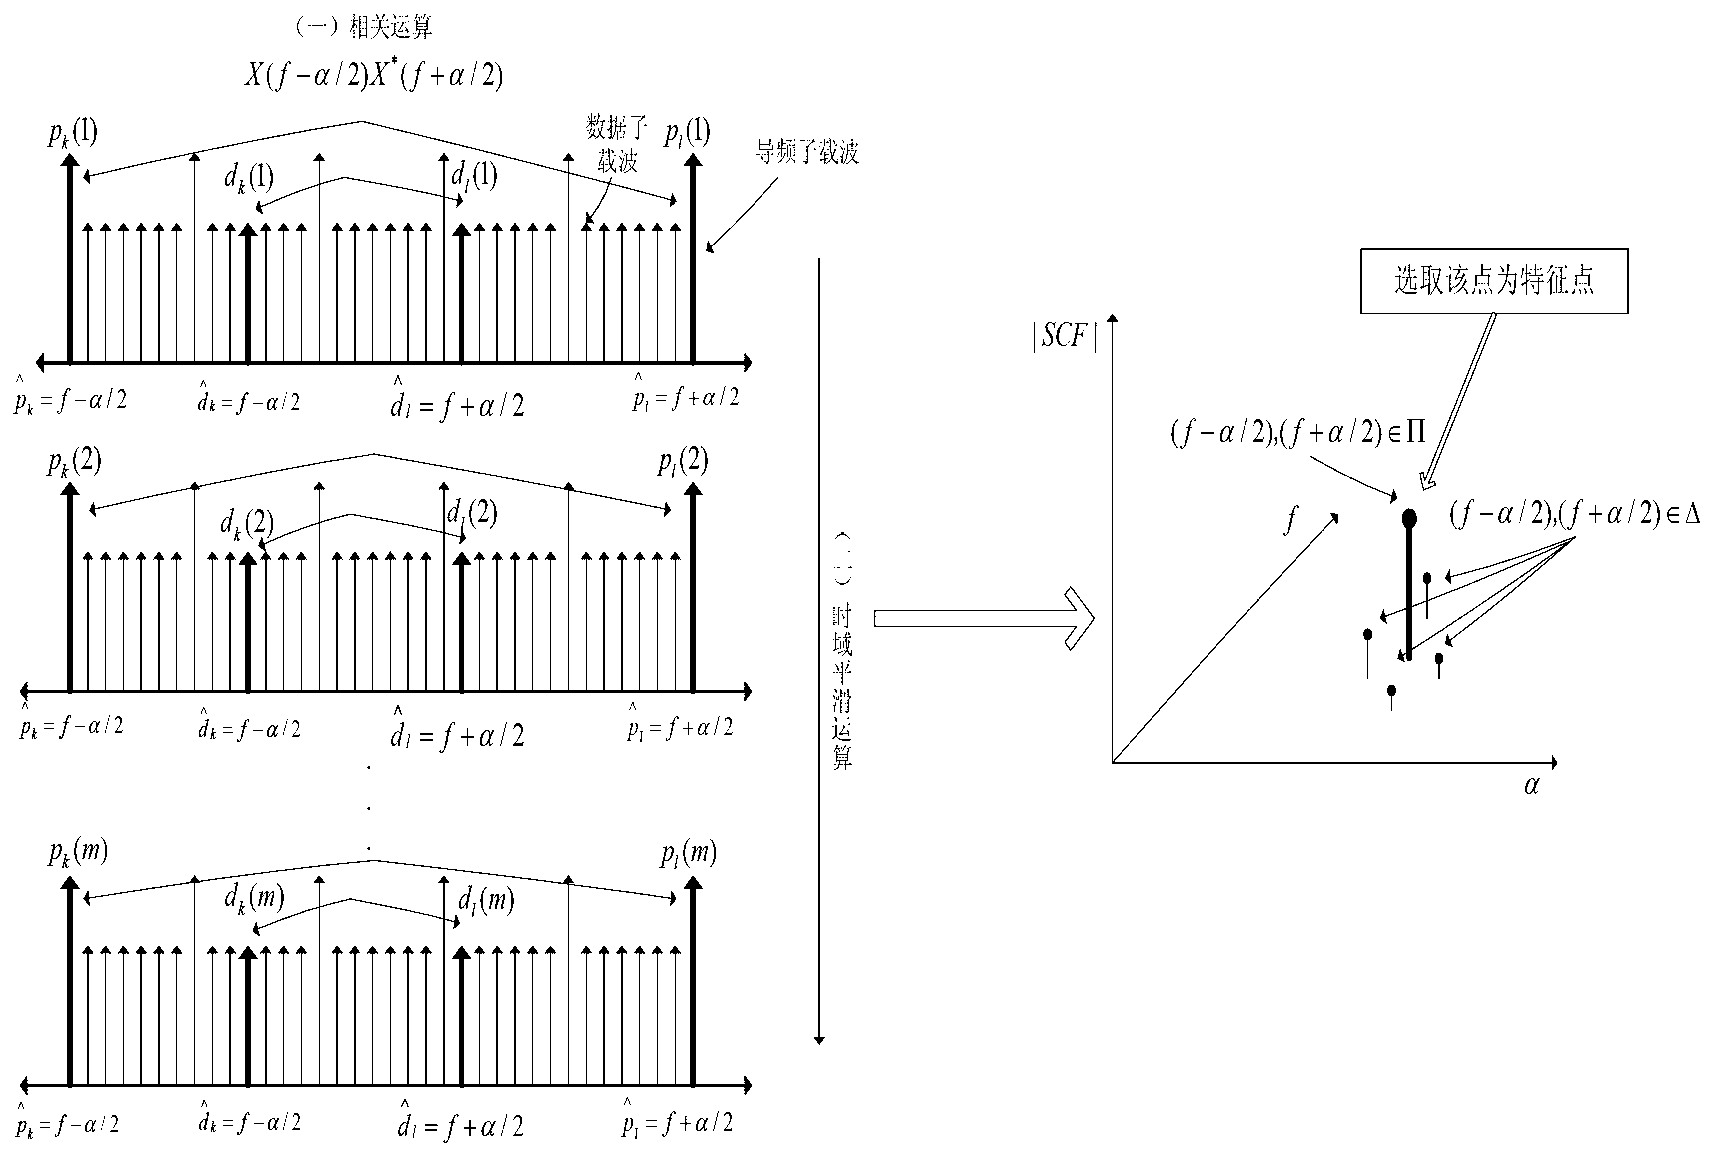 Orthogonal frequency division multiplexing (OFDM) frequency domain interpolation pilot frequency-based cyclostationary feature spectrum sensing method